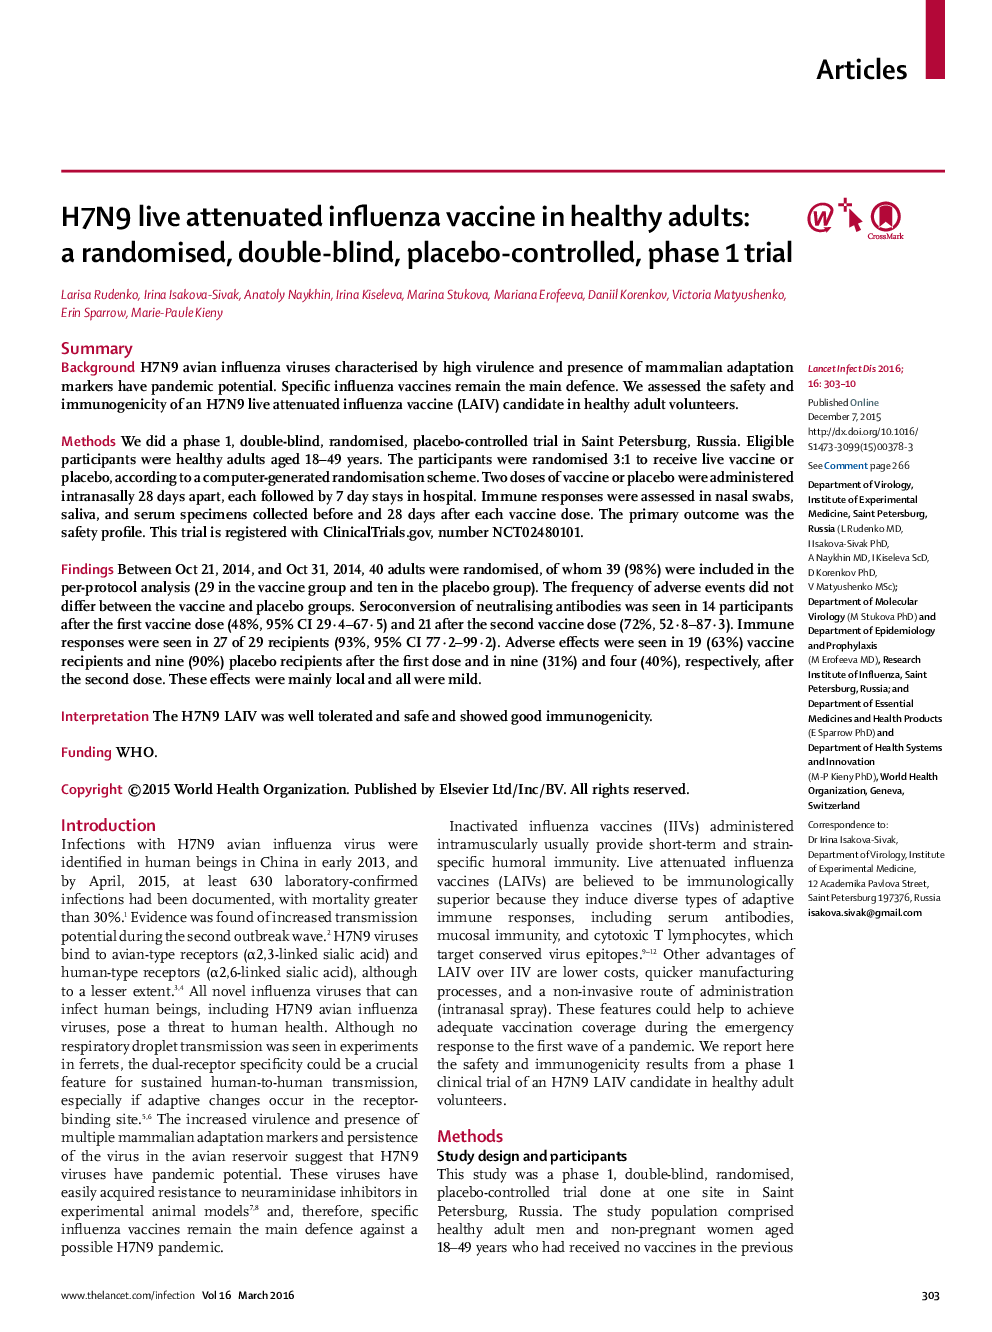 H7N9 live attenuated influenza vaccine in healthy adults: a randomised, double-blind, placebo-controlled, phase 1 trial